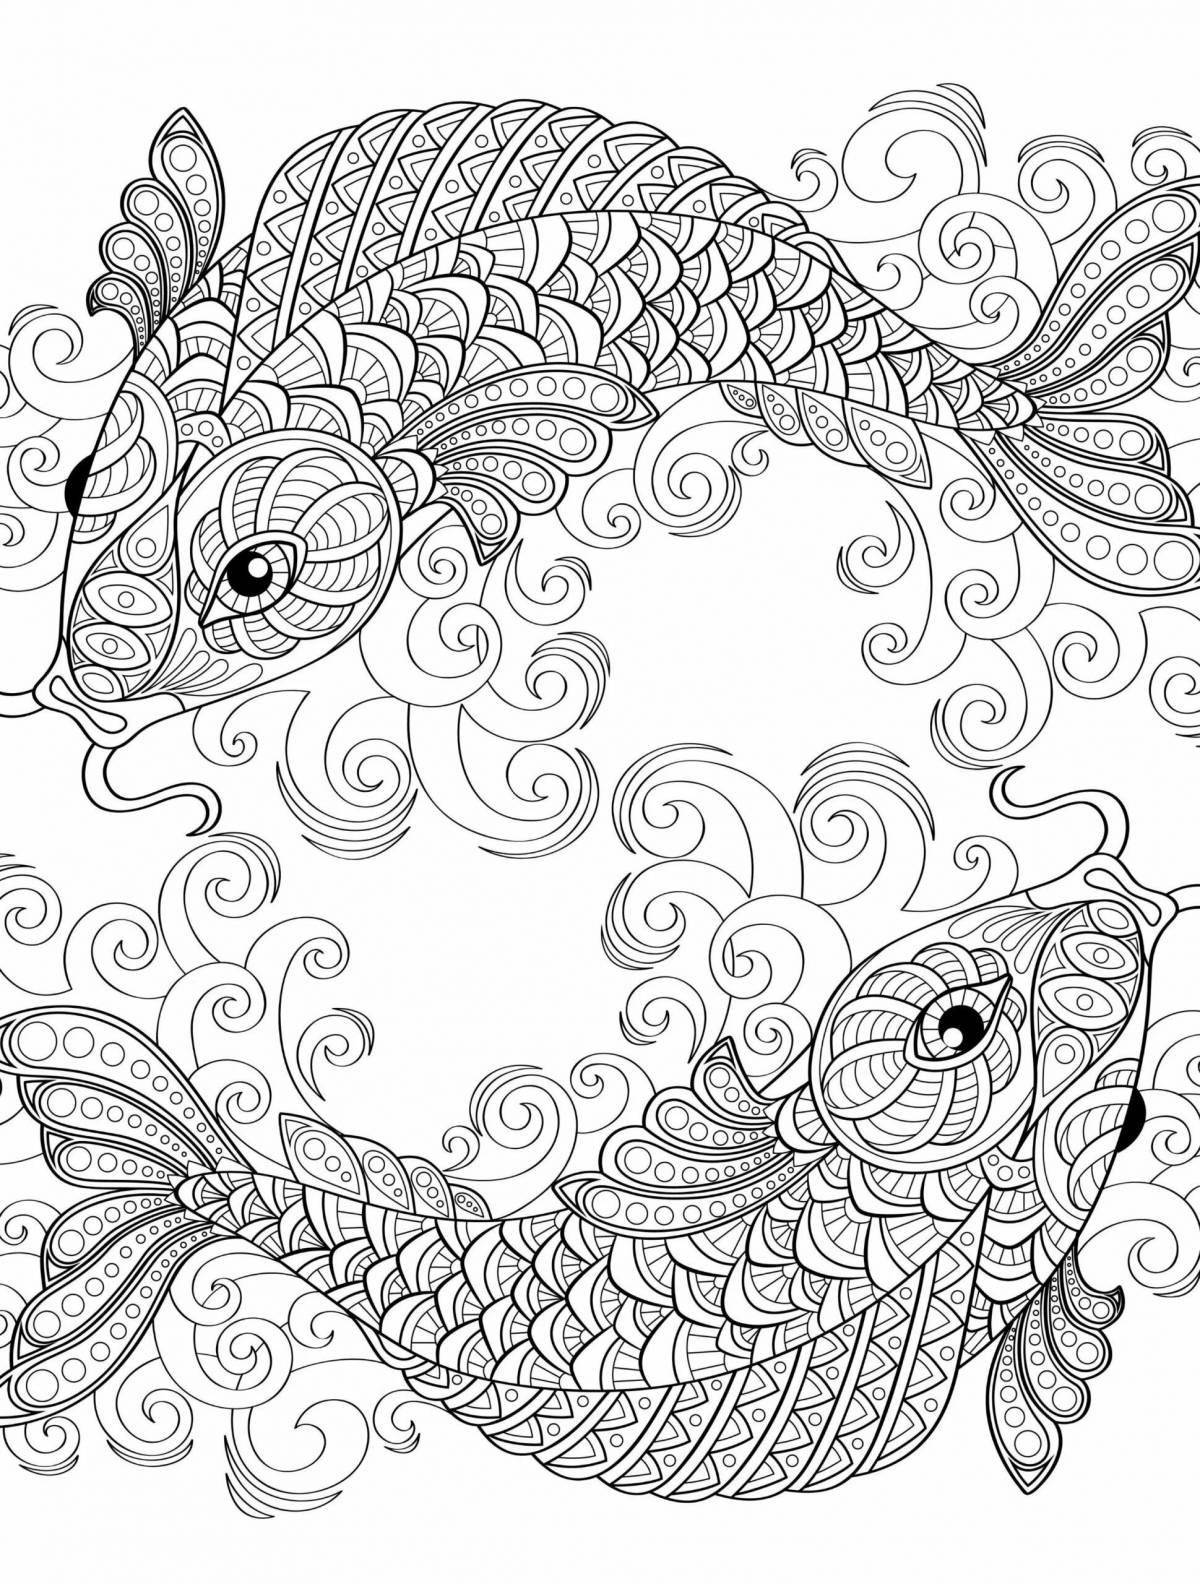 Colorful anti-stress fish coloring page